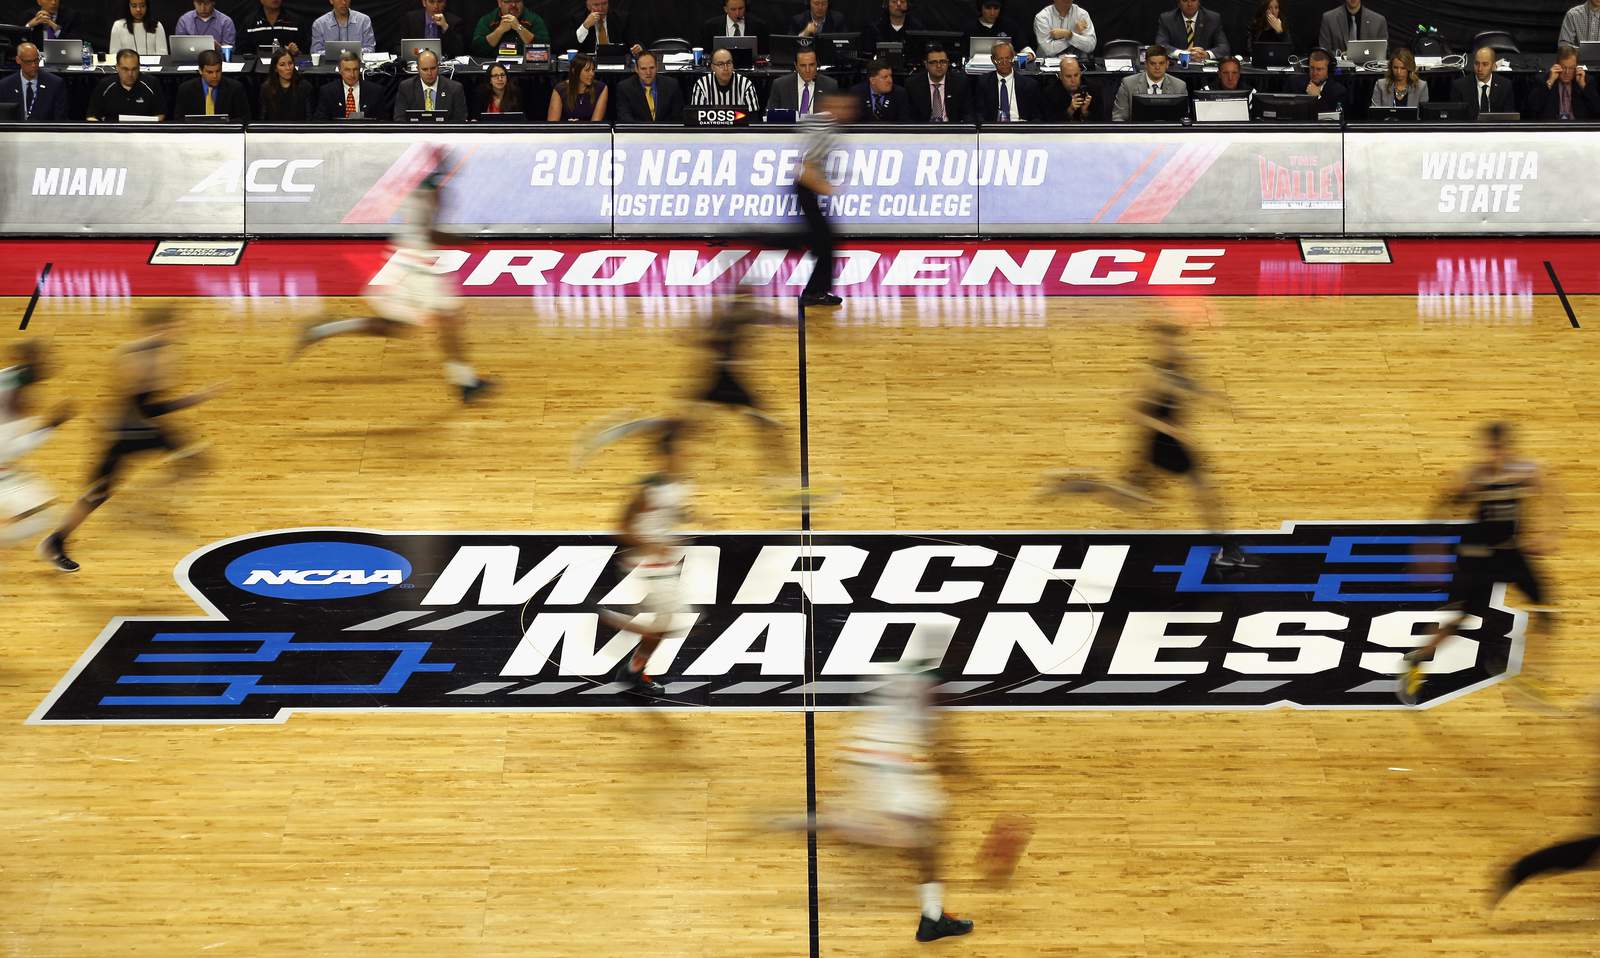 Gonzaga, Creighton, Iona? Where are these NCAA tourney teams located, anyway? A (surprisingly hard!) quiz